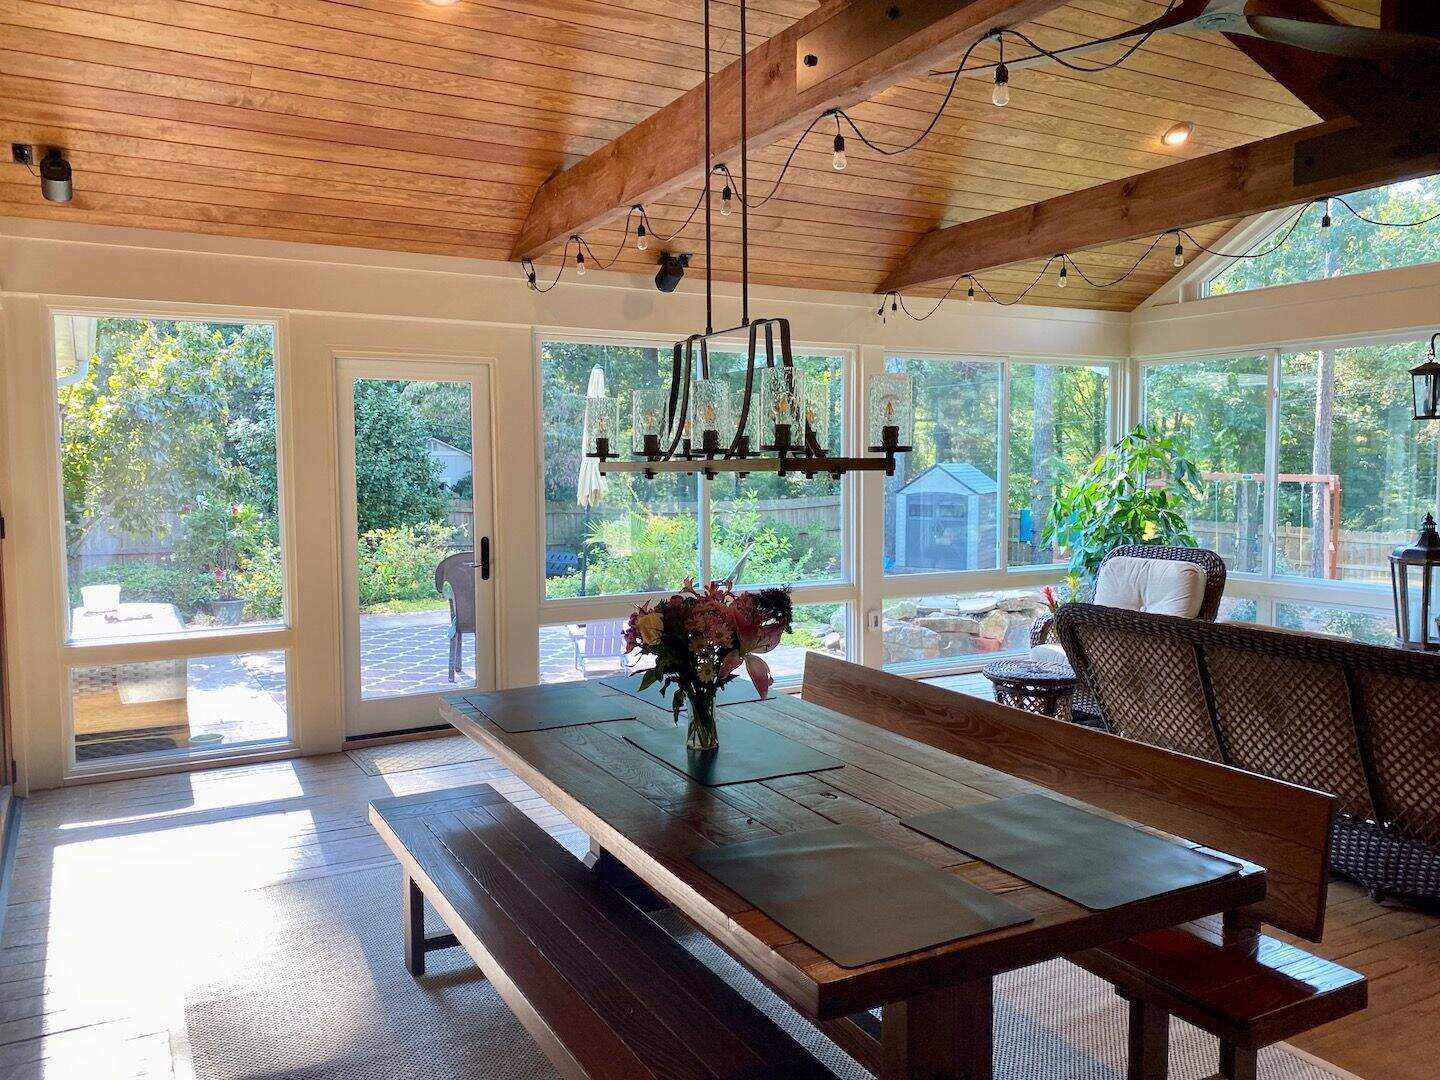 How Much To Convert A Screened In Porch To A Sunroom